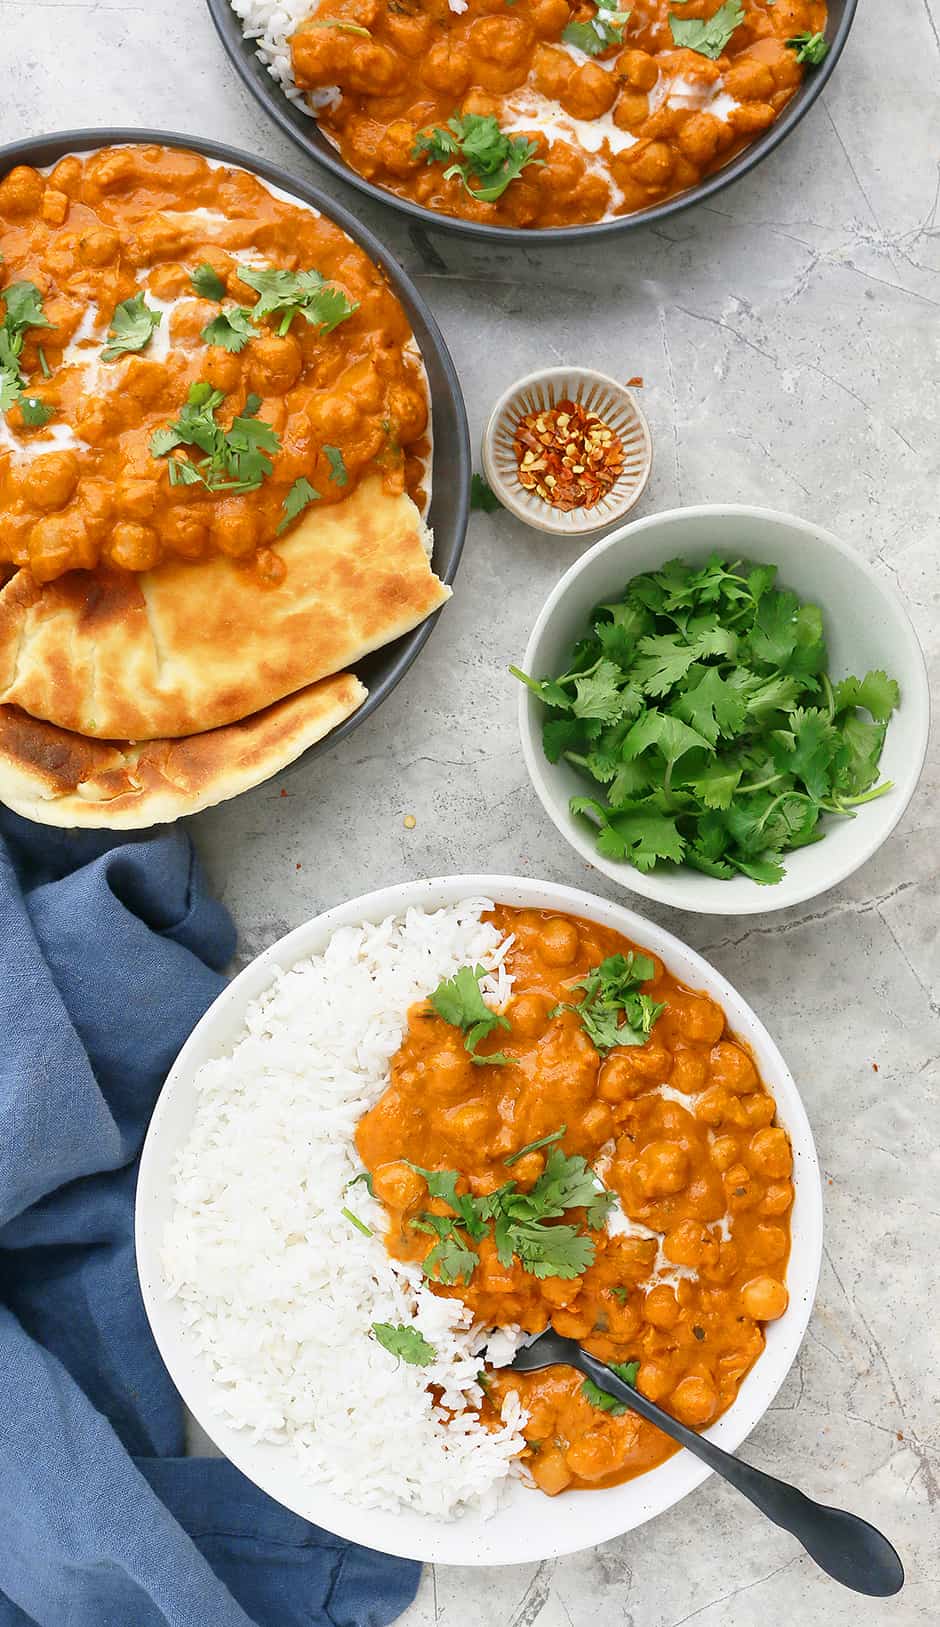 bowls of creamy Indian chickpeas curry with white rice and naan, a small bowl with fresh cilantro and a tiny bowl of red pepper flakes